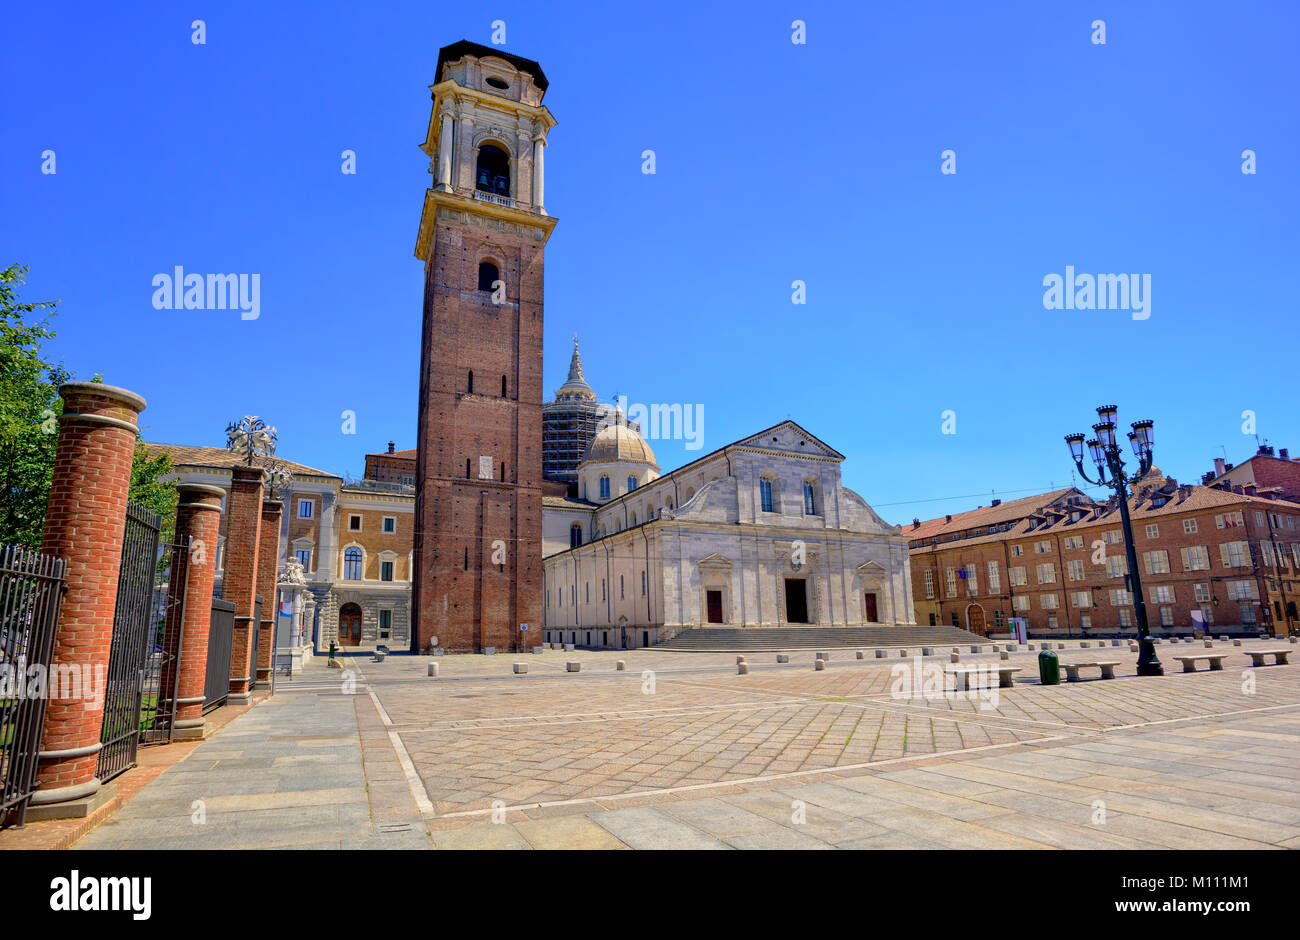 Duomo di Torino is catholic cathedral where the Holy Shroud of Turin is rested, Turin, Italy Stock Photo